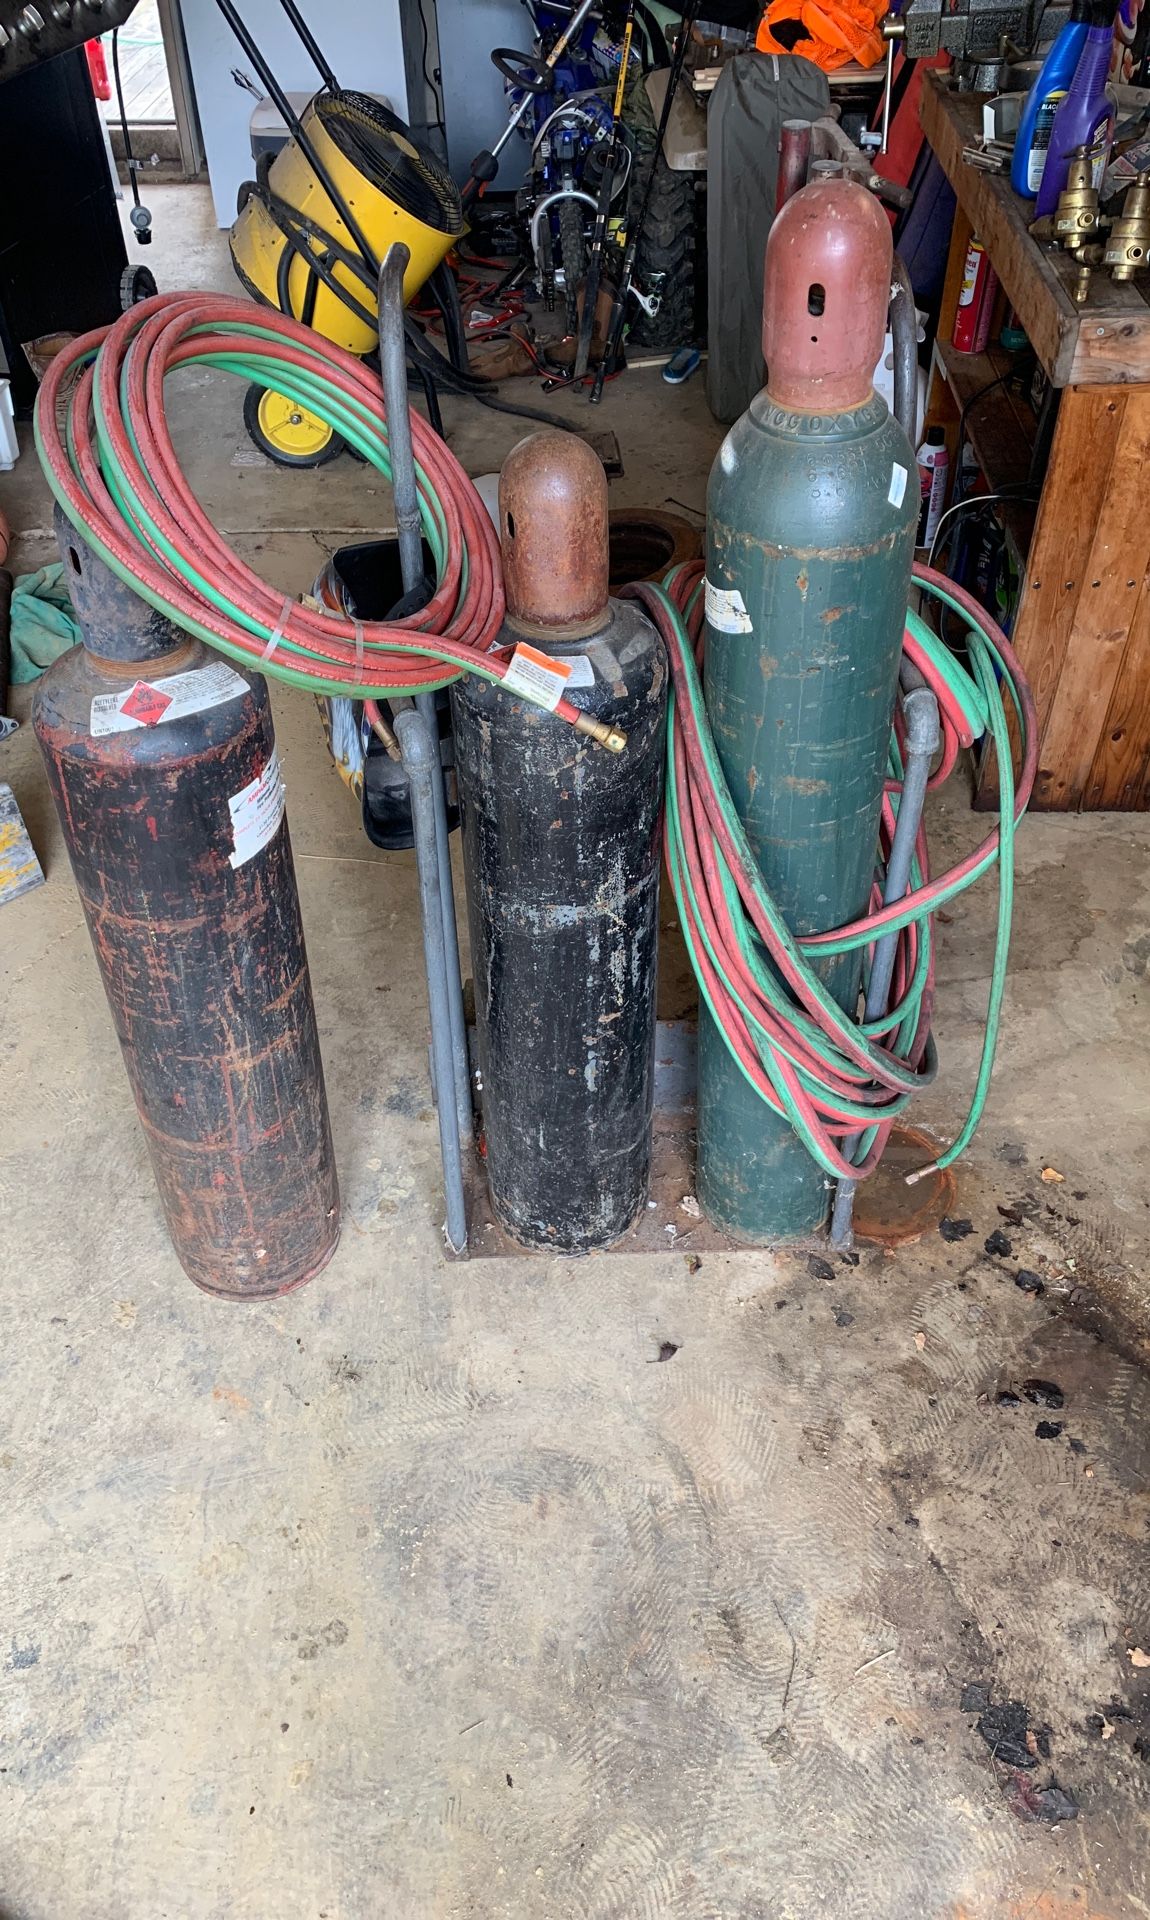 Oxygen and acetylene torch set up